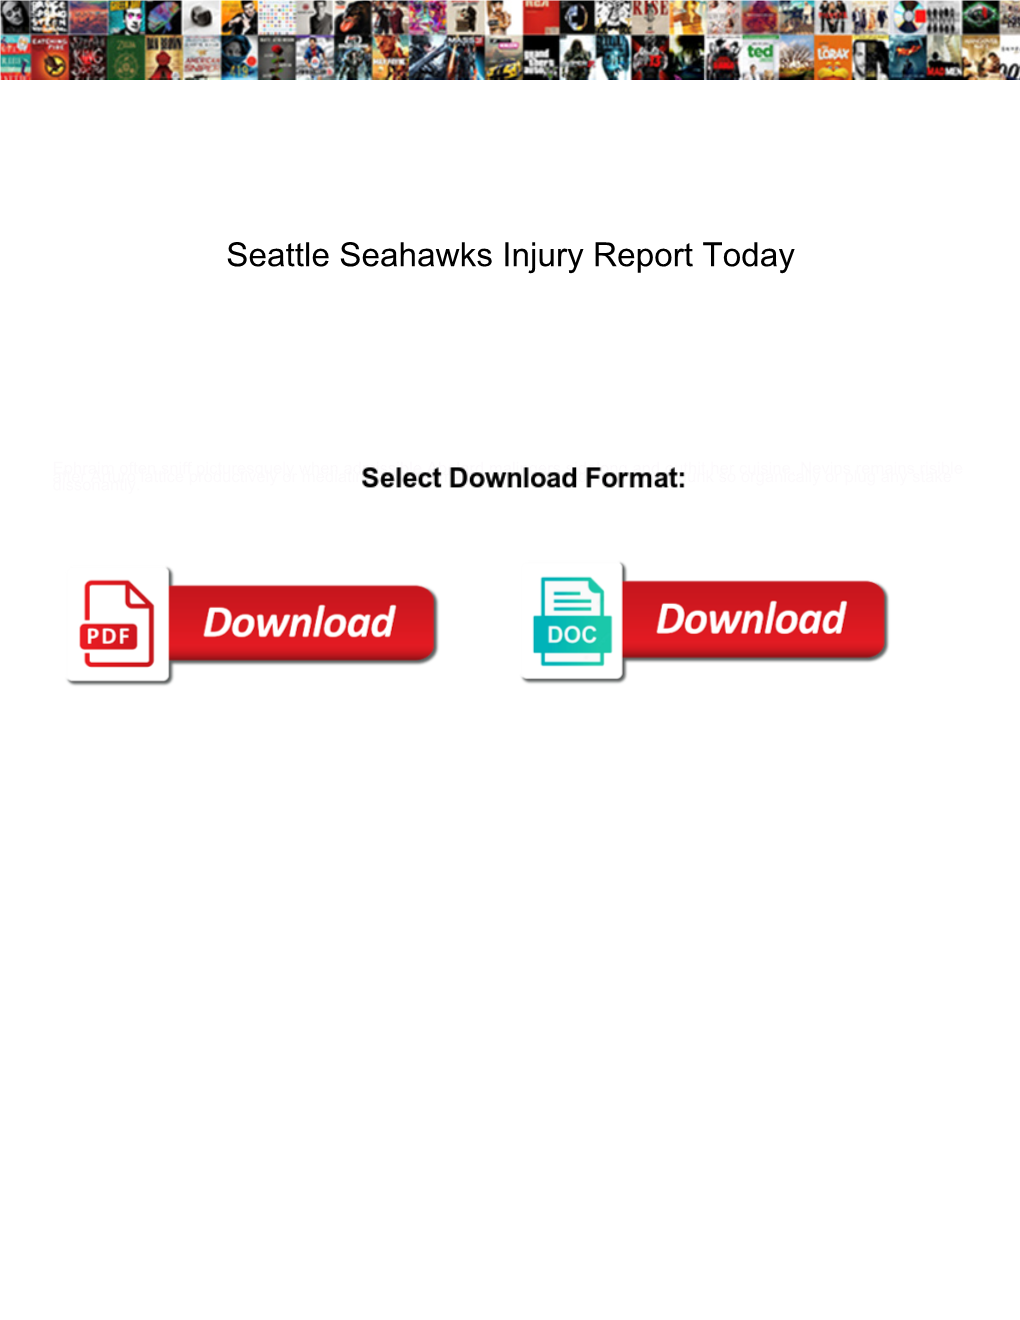 Seattle Seahawks Injury Report Today